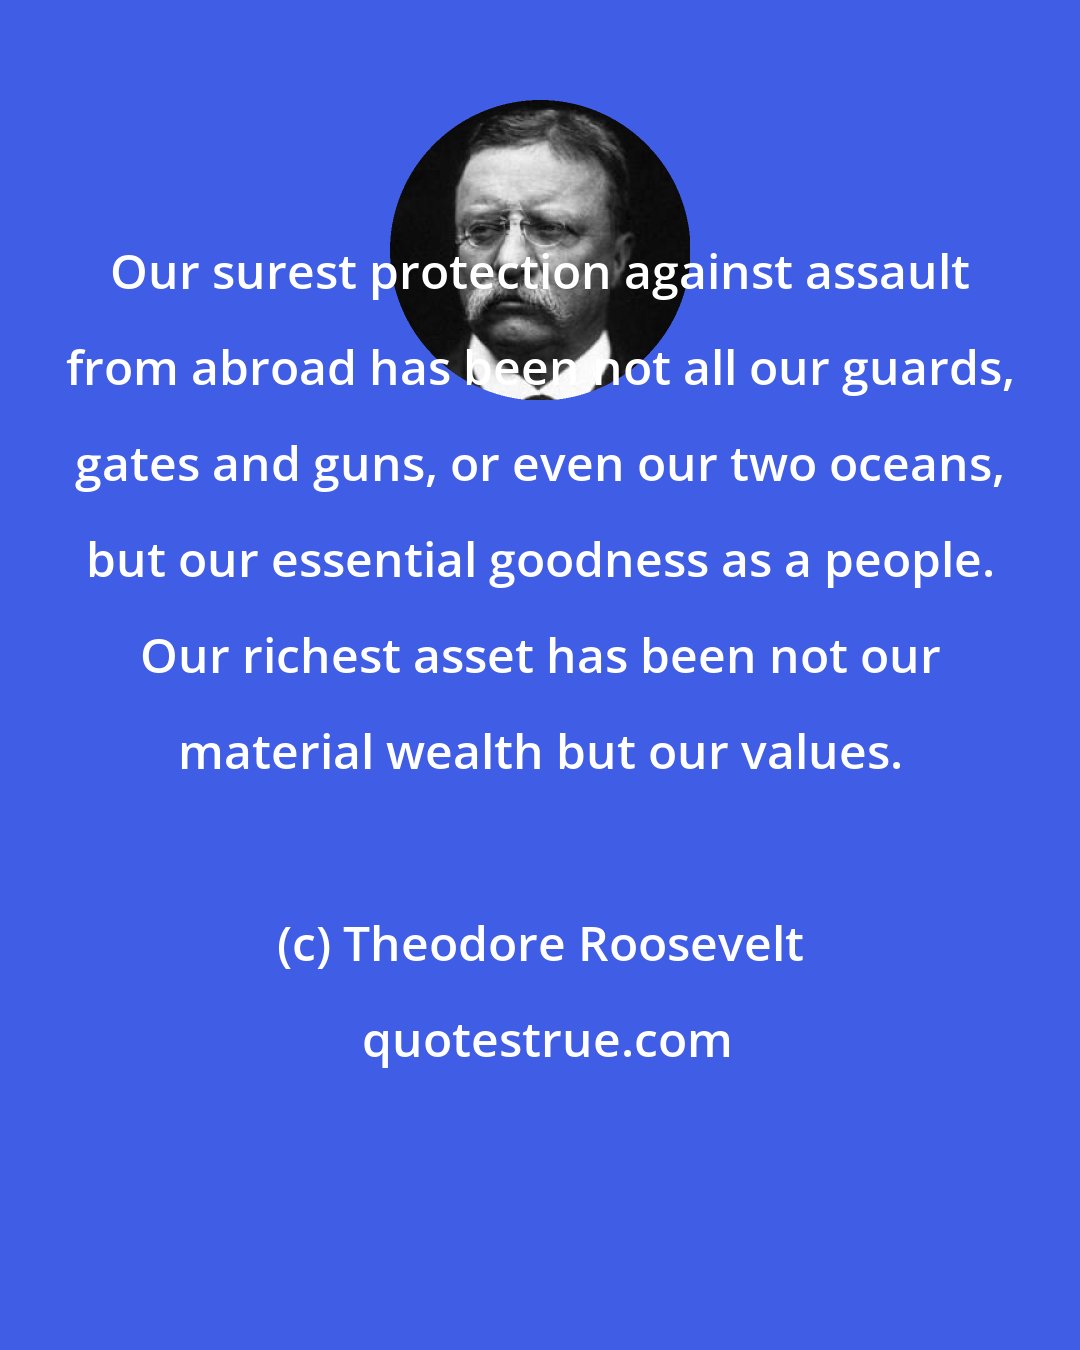 Theodore Roosevelt: Our surest protection against assault from abroad has been not all our guards, gates and guns, or even our two oceans, but our essential goodness as a people. Our richest asset has been not our material wealth but our values.